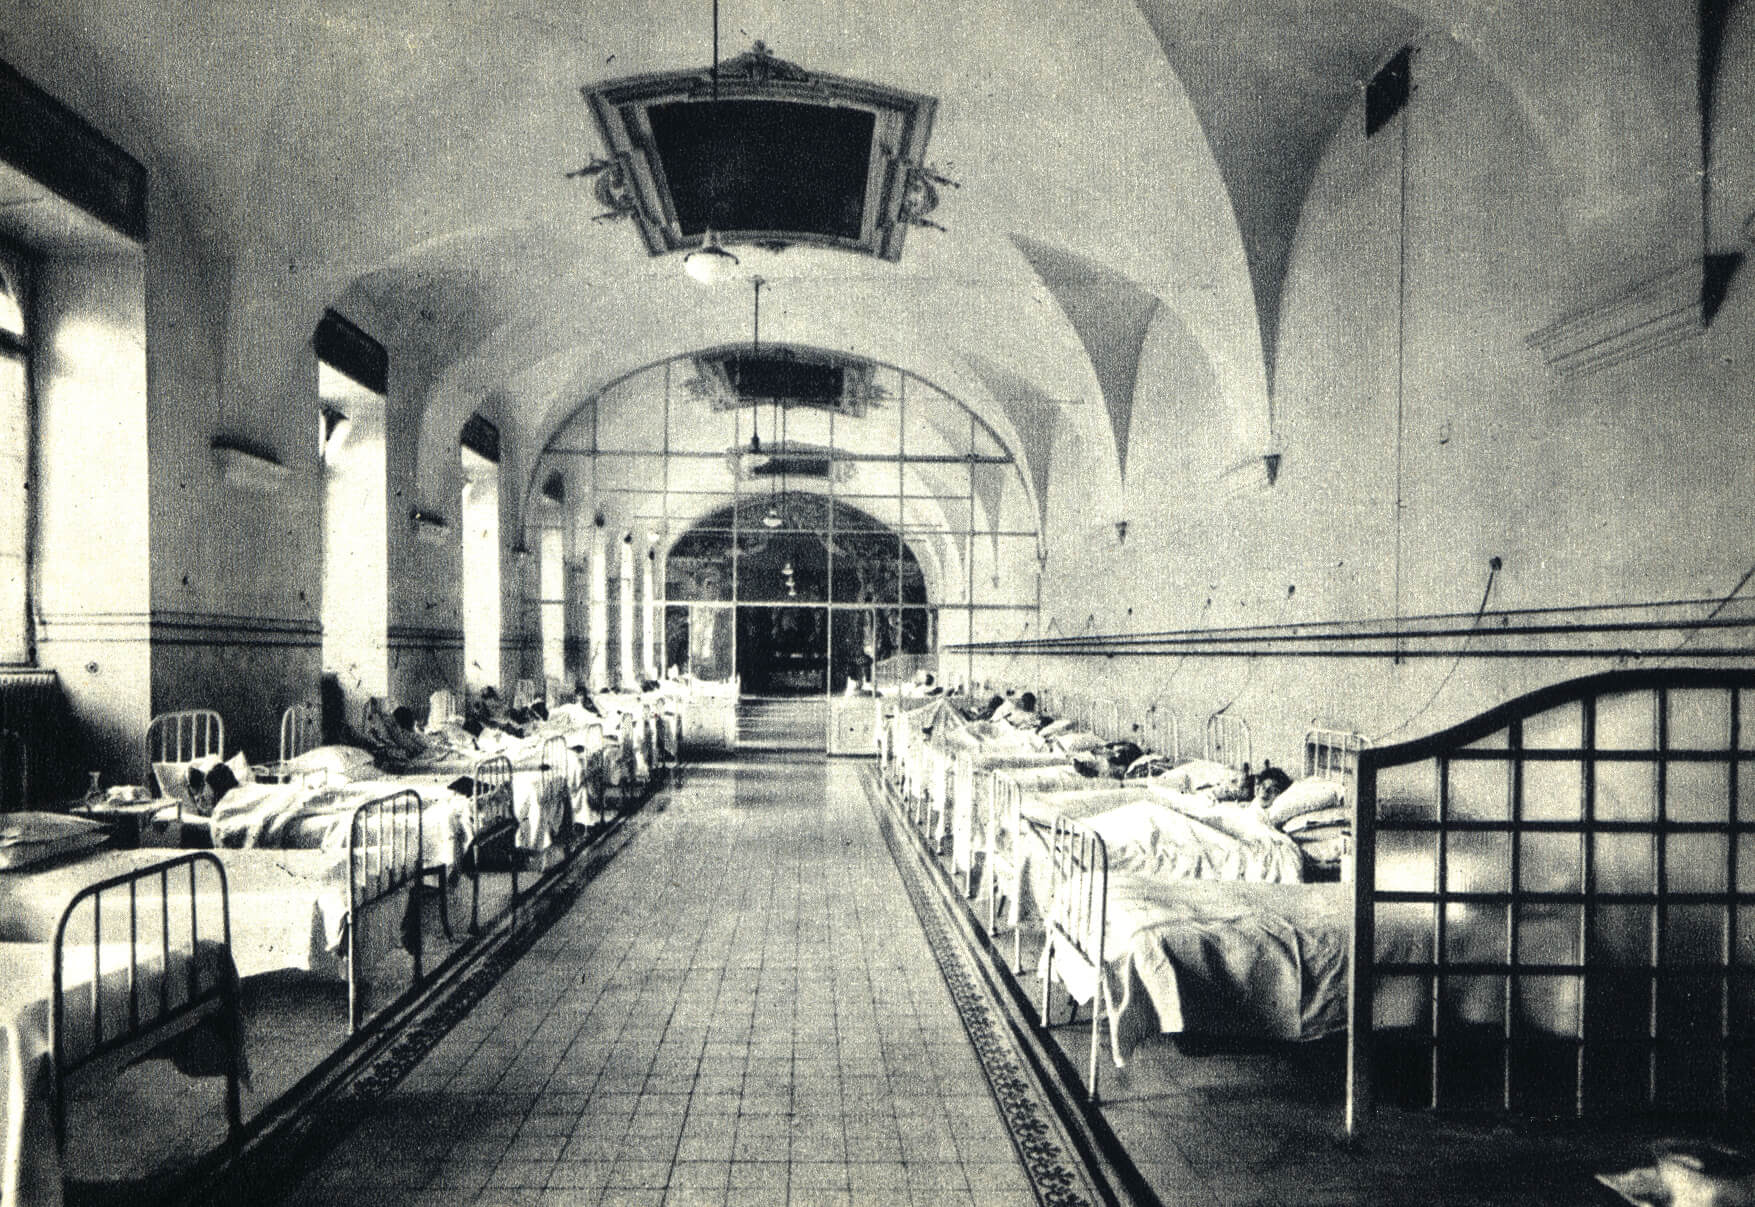 The ‘Syndrome K’ hospital unit as seen in 1944.